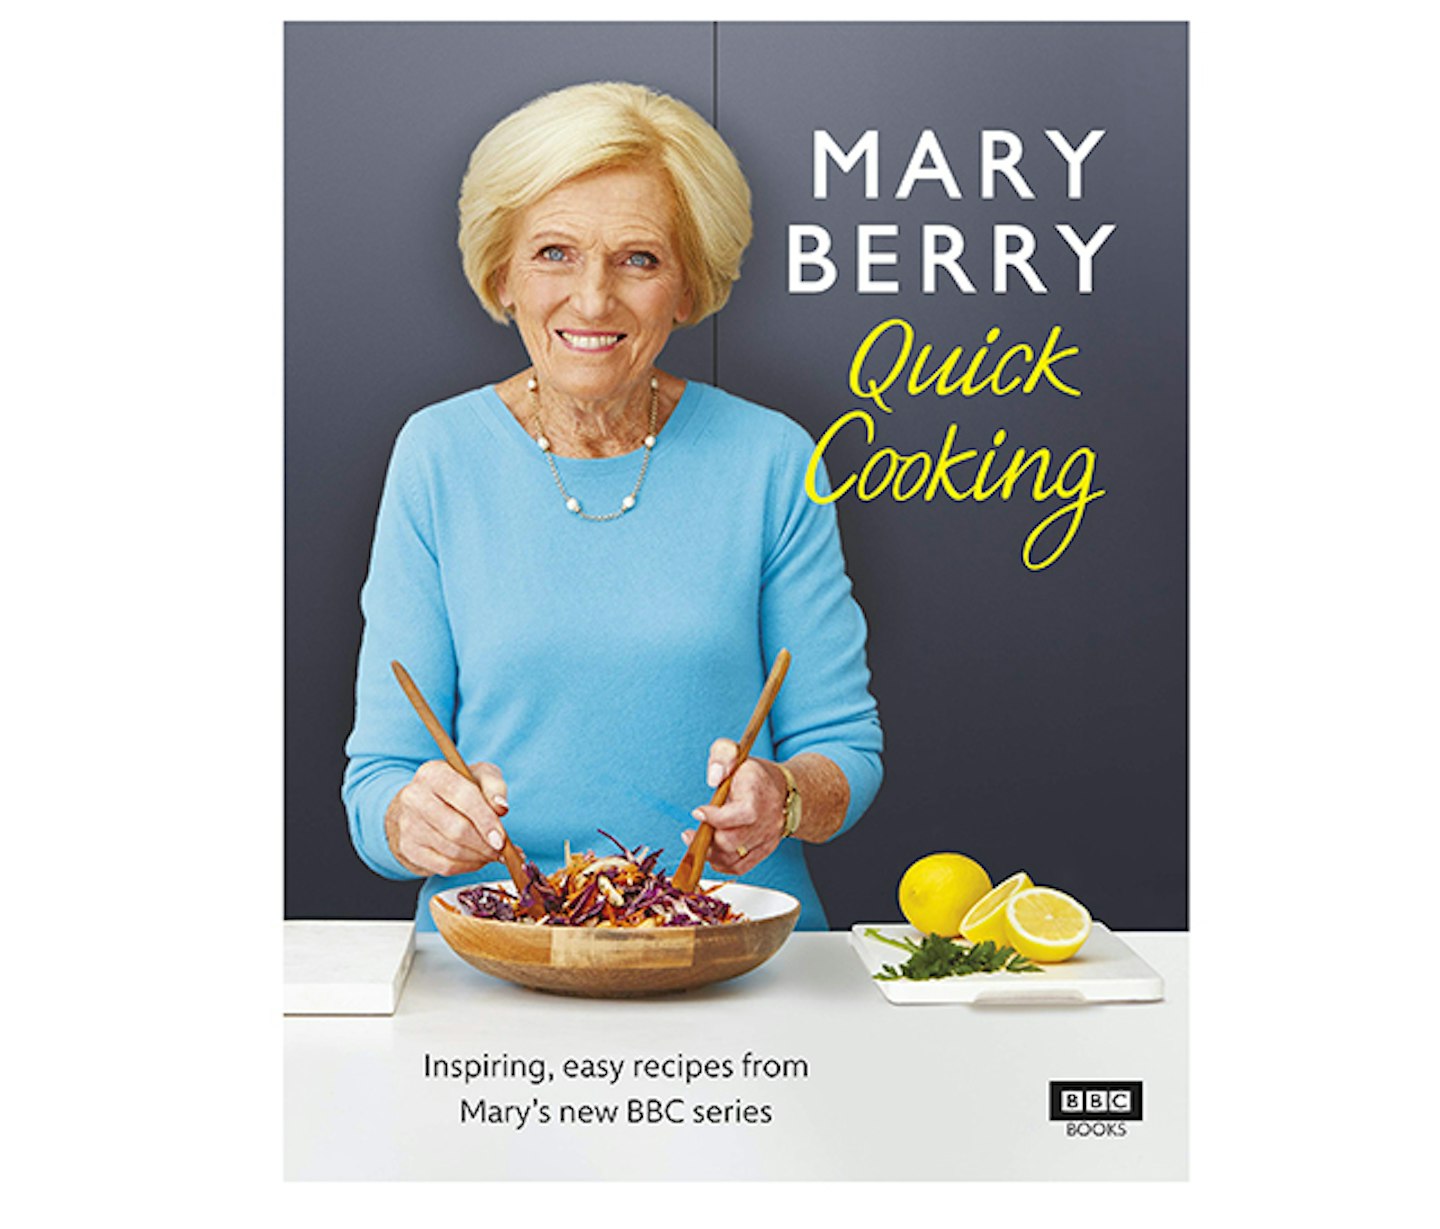 Mary Berryu2019s Quick Cooking